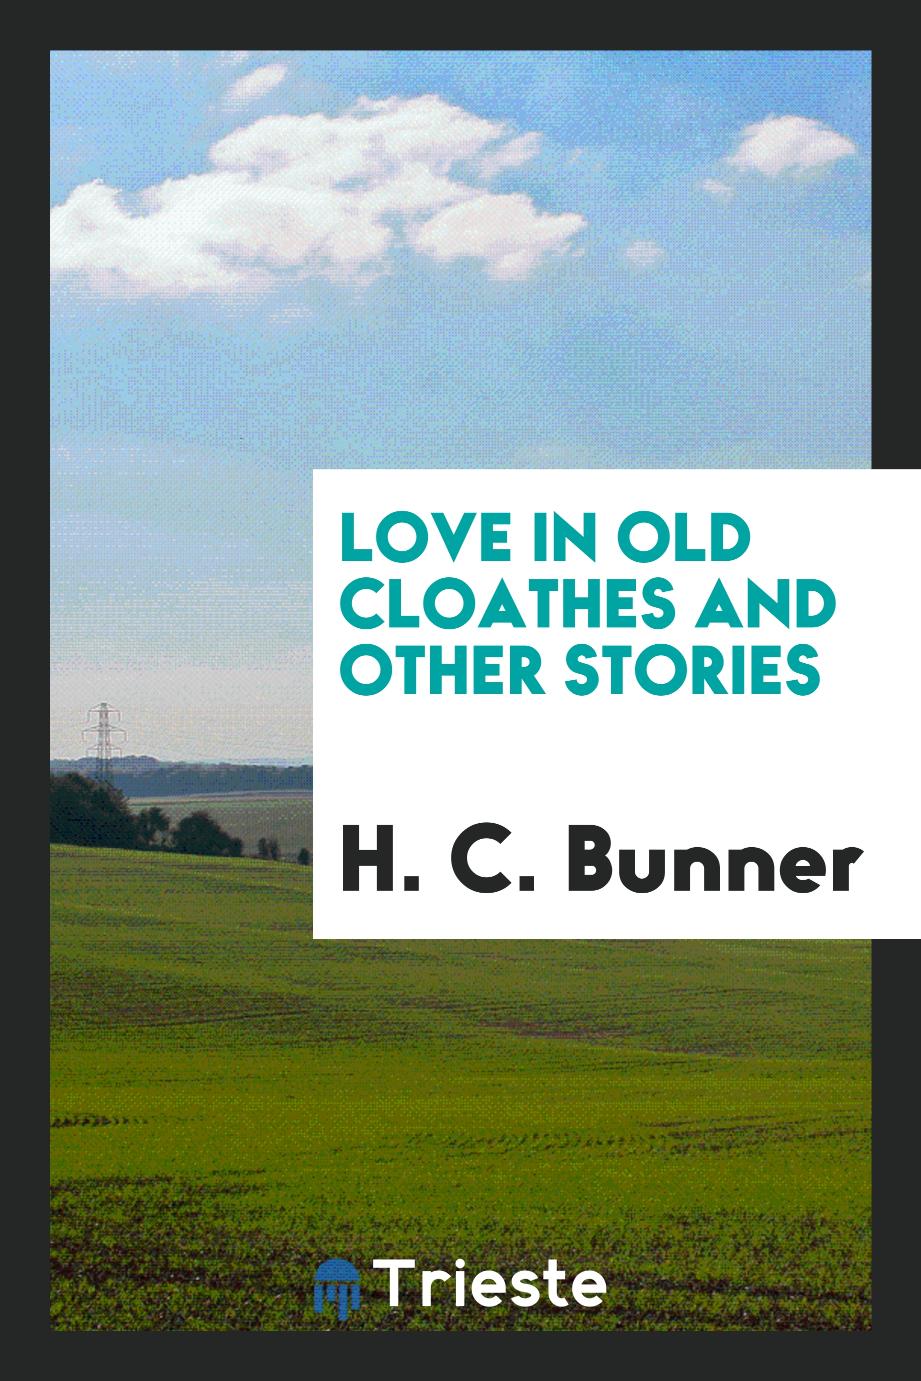 Love in old cloathes and other stories